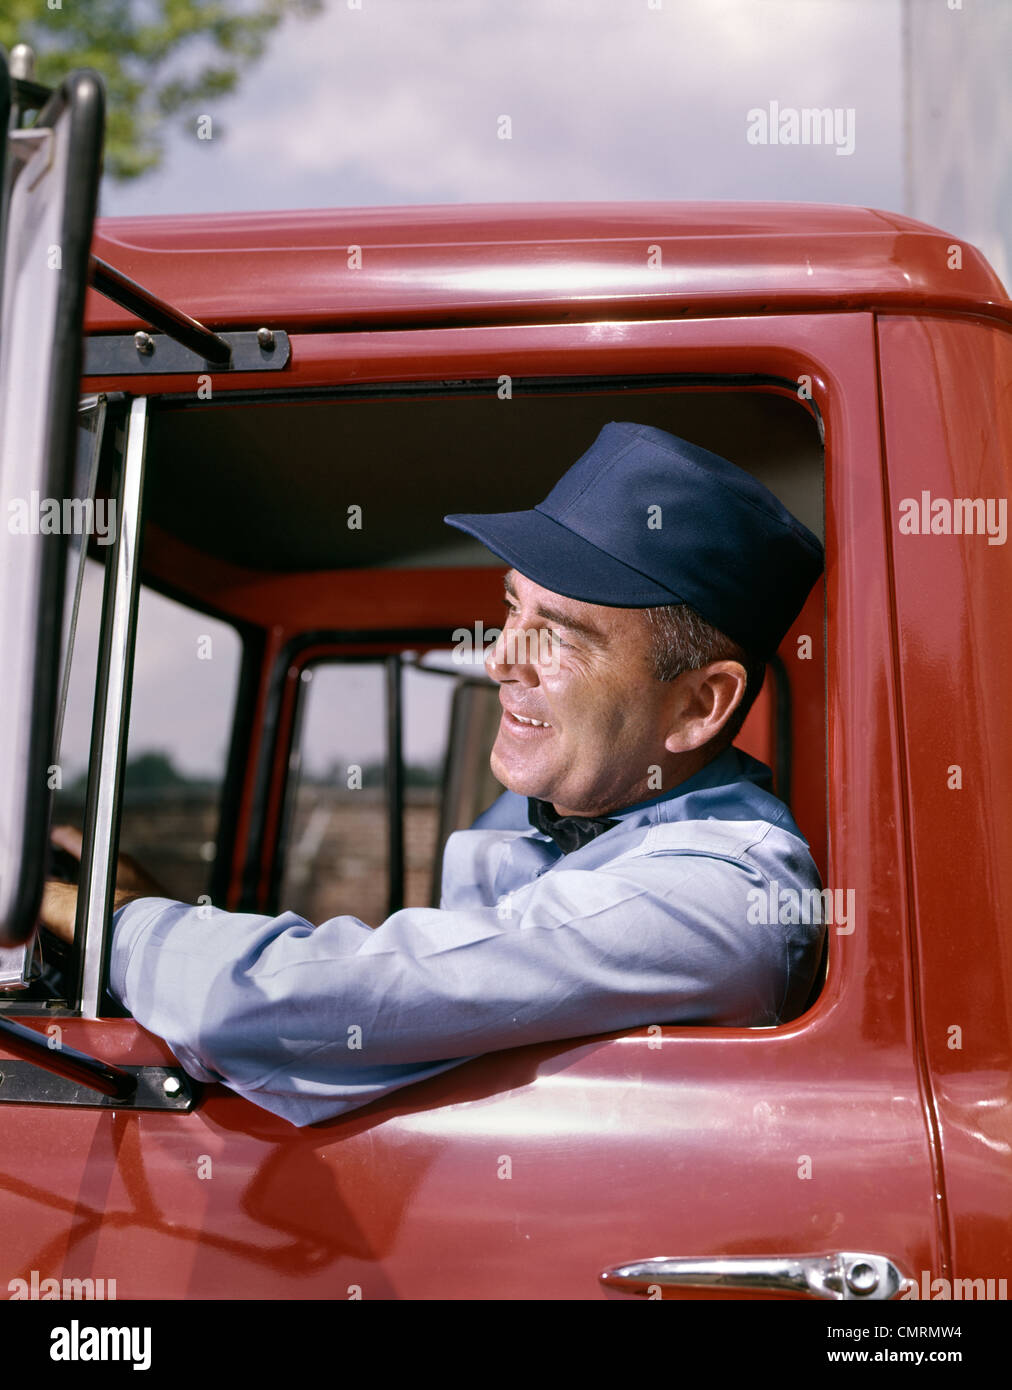 1960 1960s MAN TRUCK DRIVER DELIVERY HAT SMILE Stock Photo - Alamy